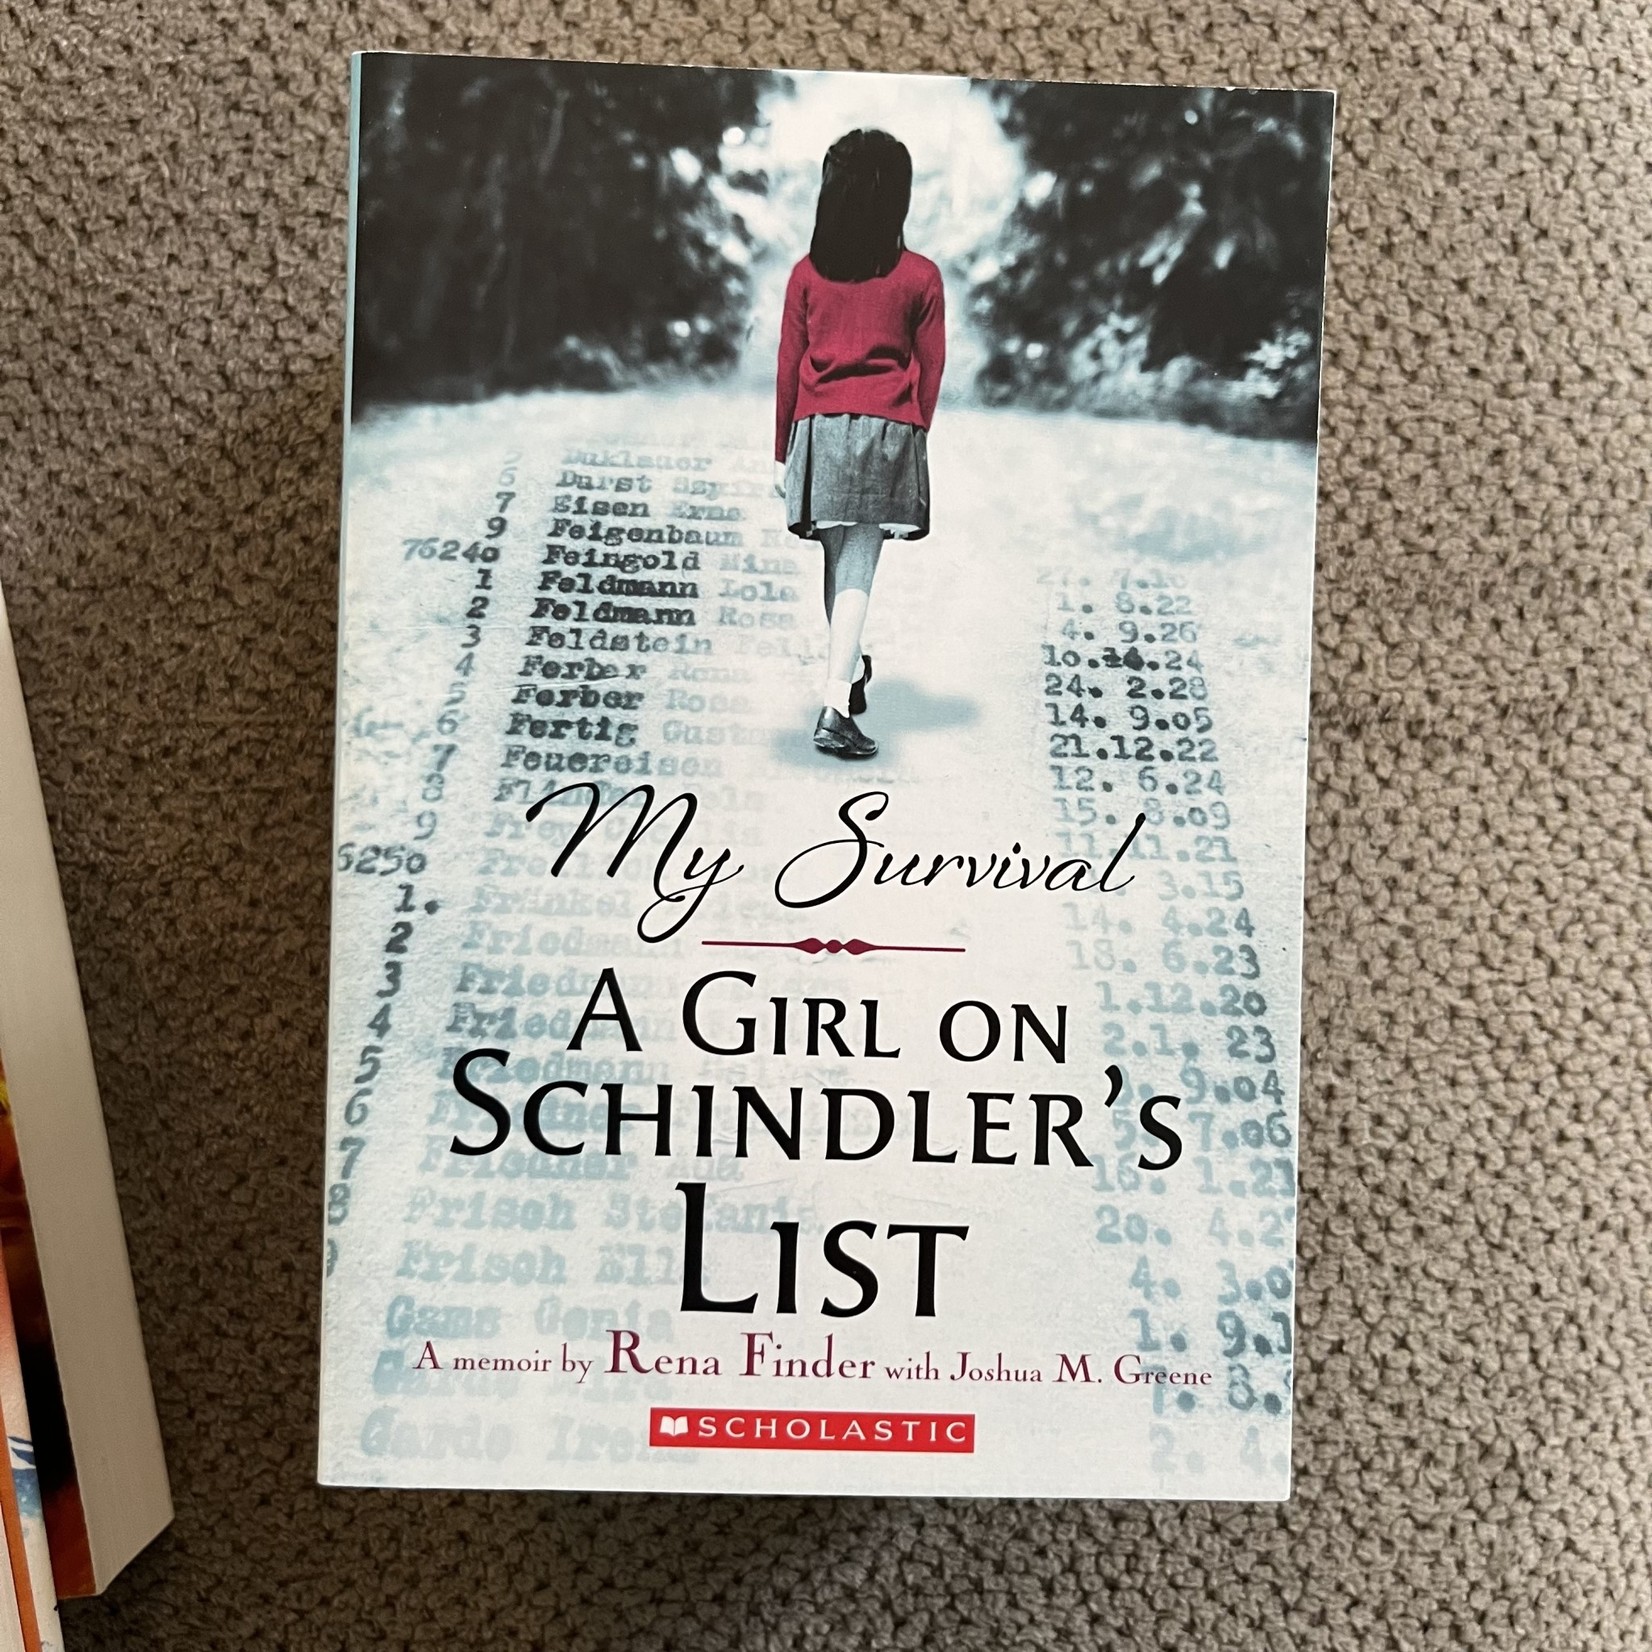 My Survival - A Girl on Schindler's List